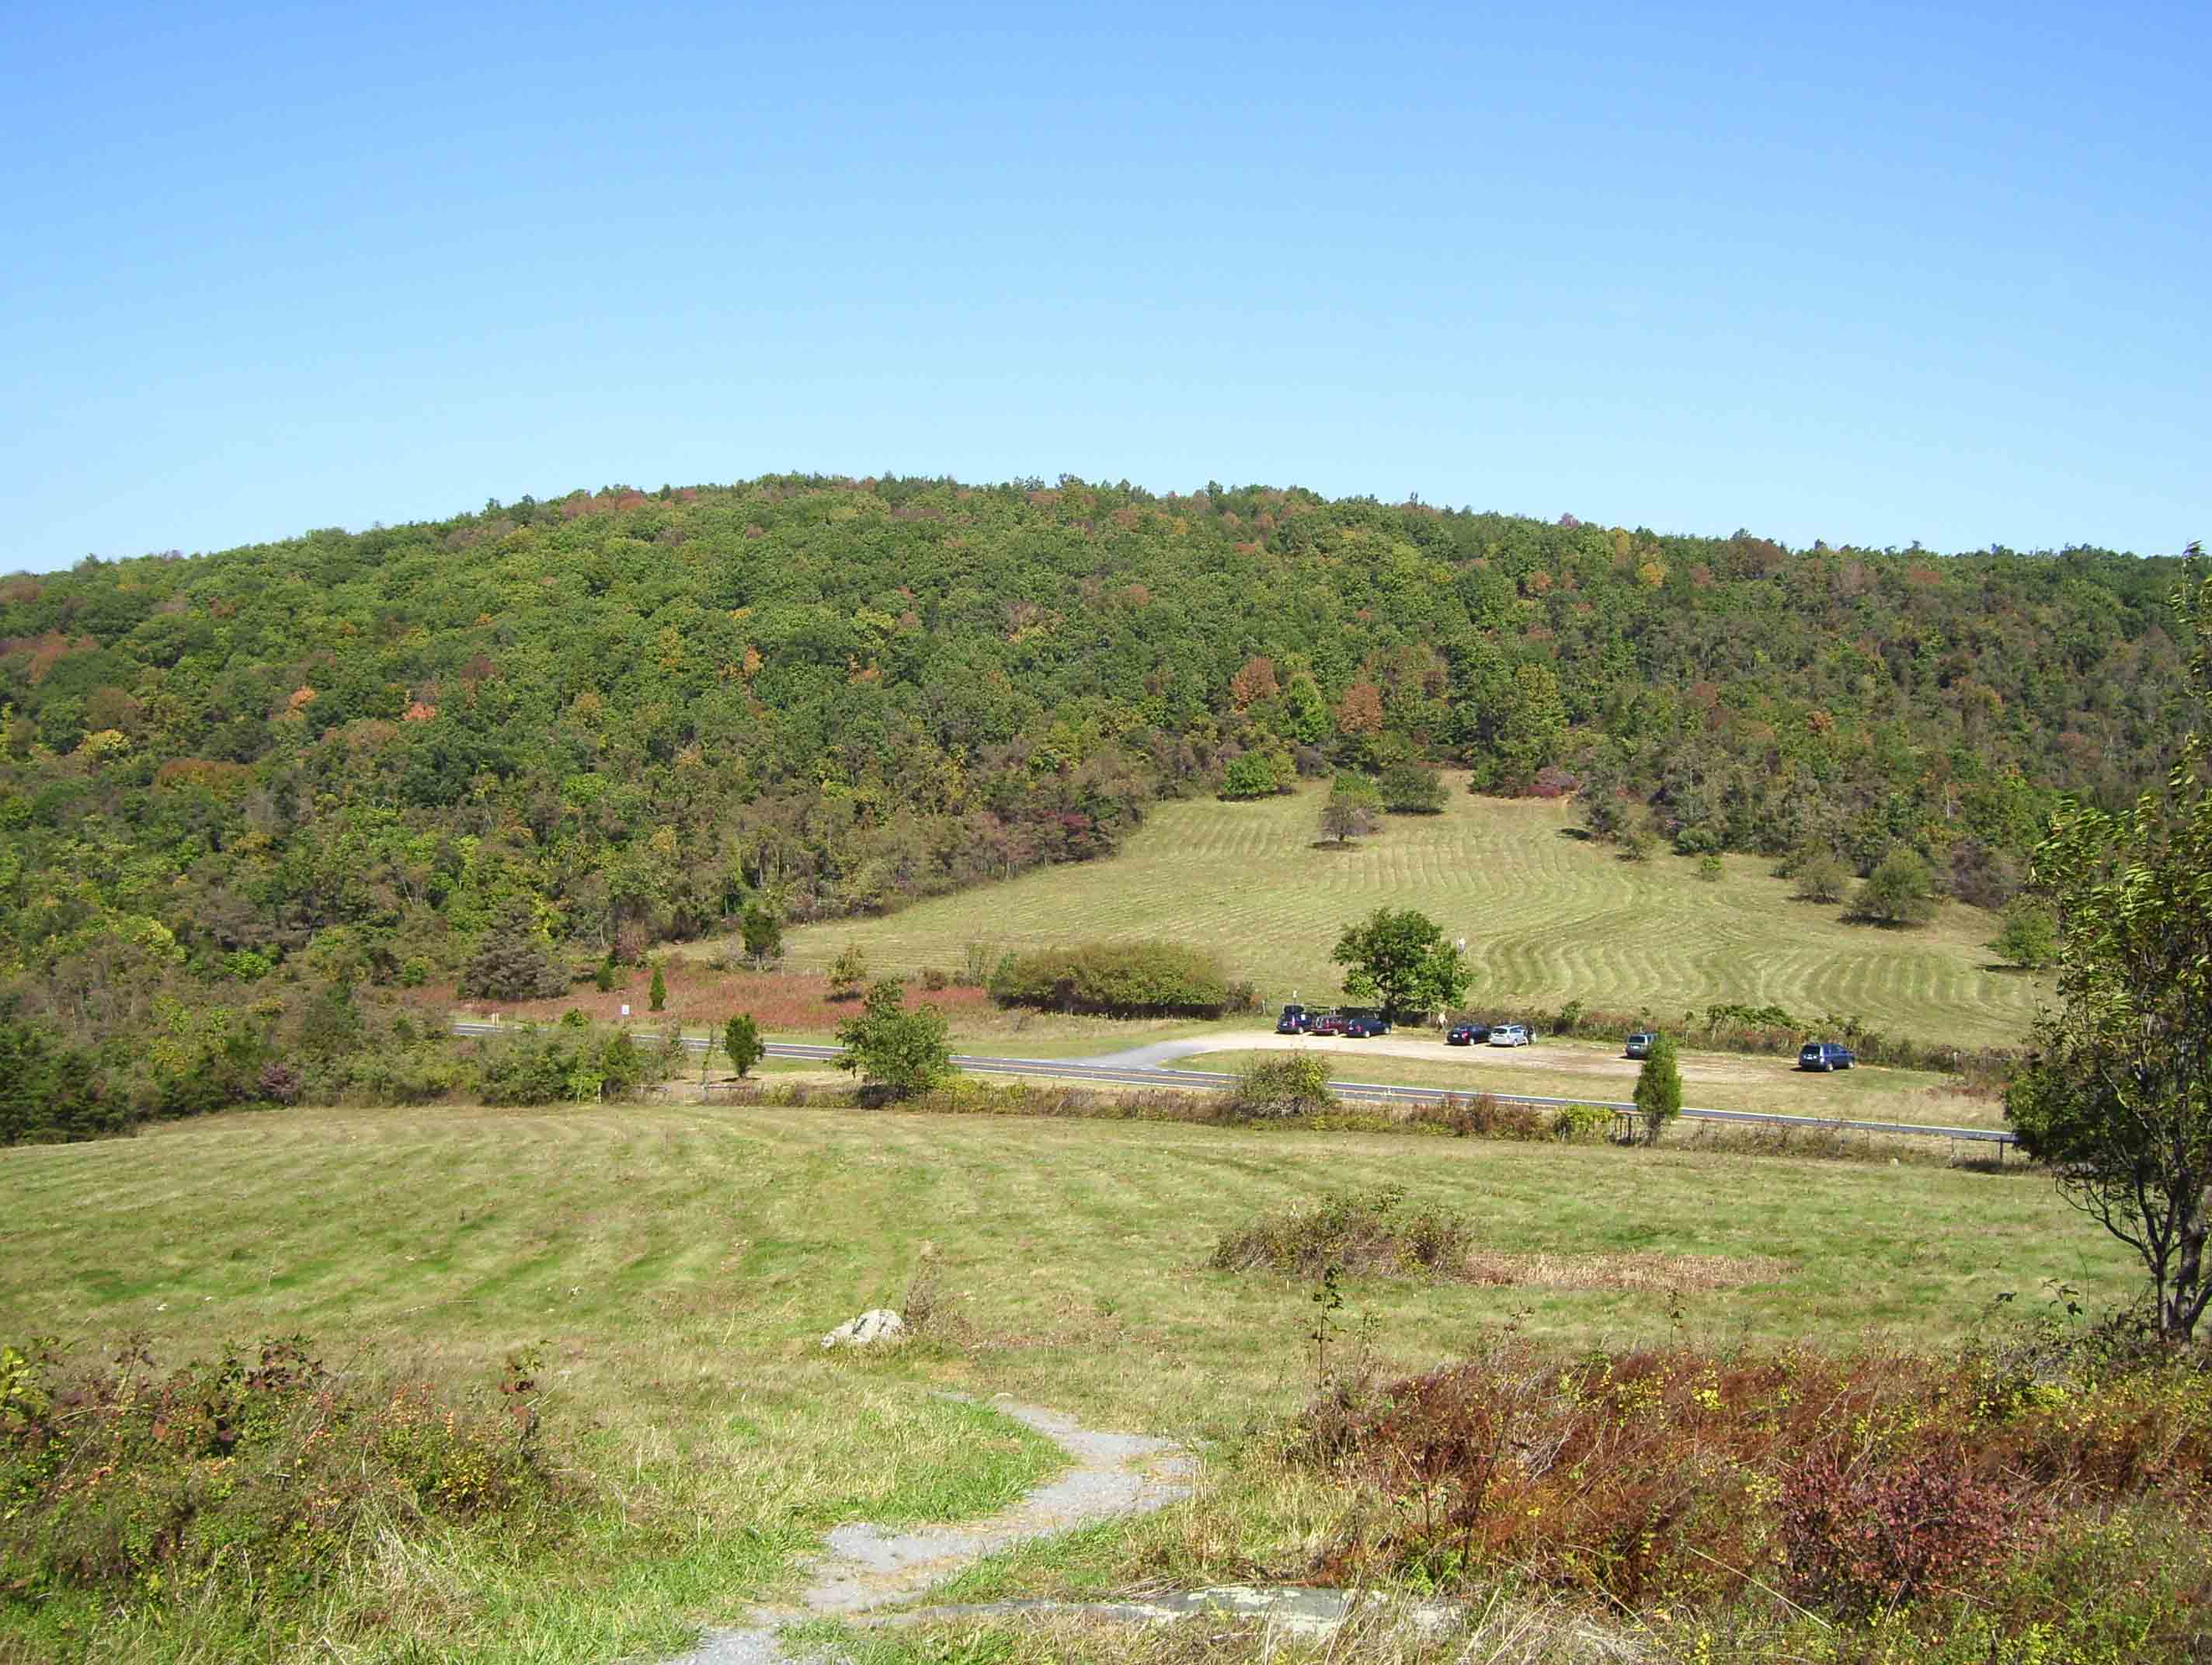 View east across Beagle Gap (Mile 3.2) and the Skyline Drive to Little Calf Mountain. The parking area at Beagle Gap is visible.  Courtesy dlcul@conncoll.edu